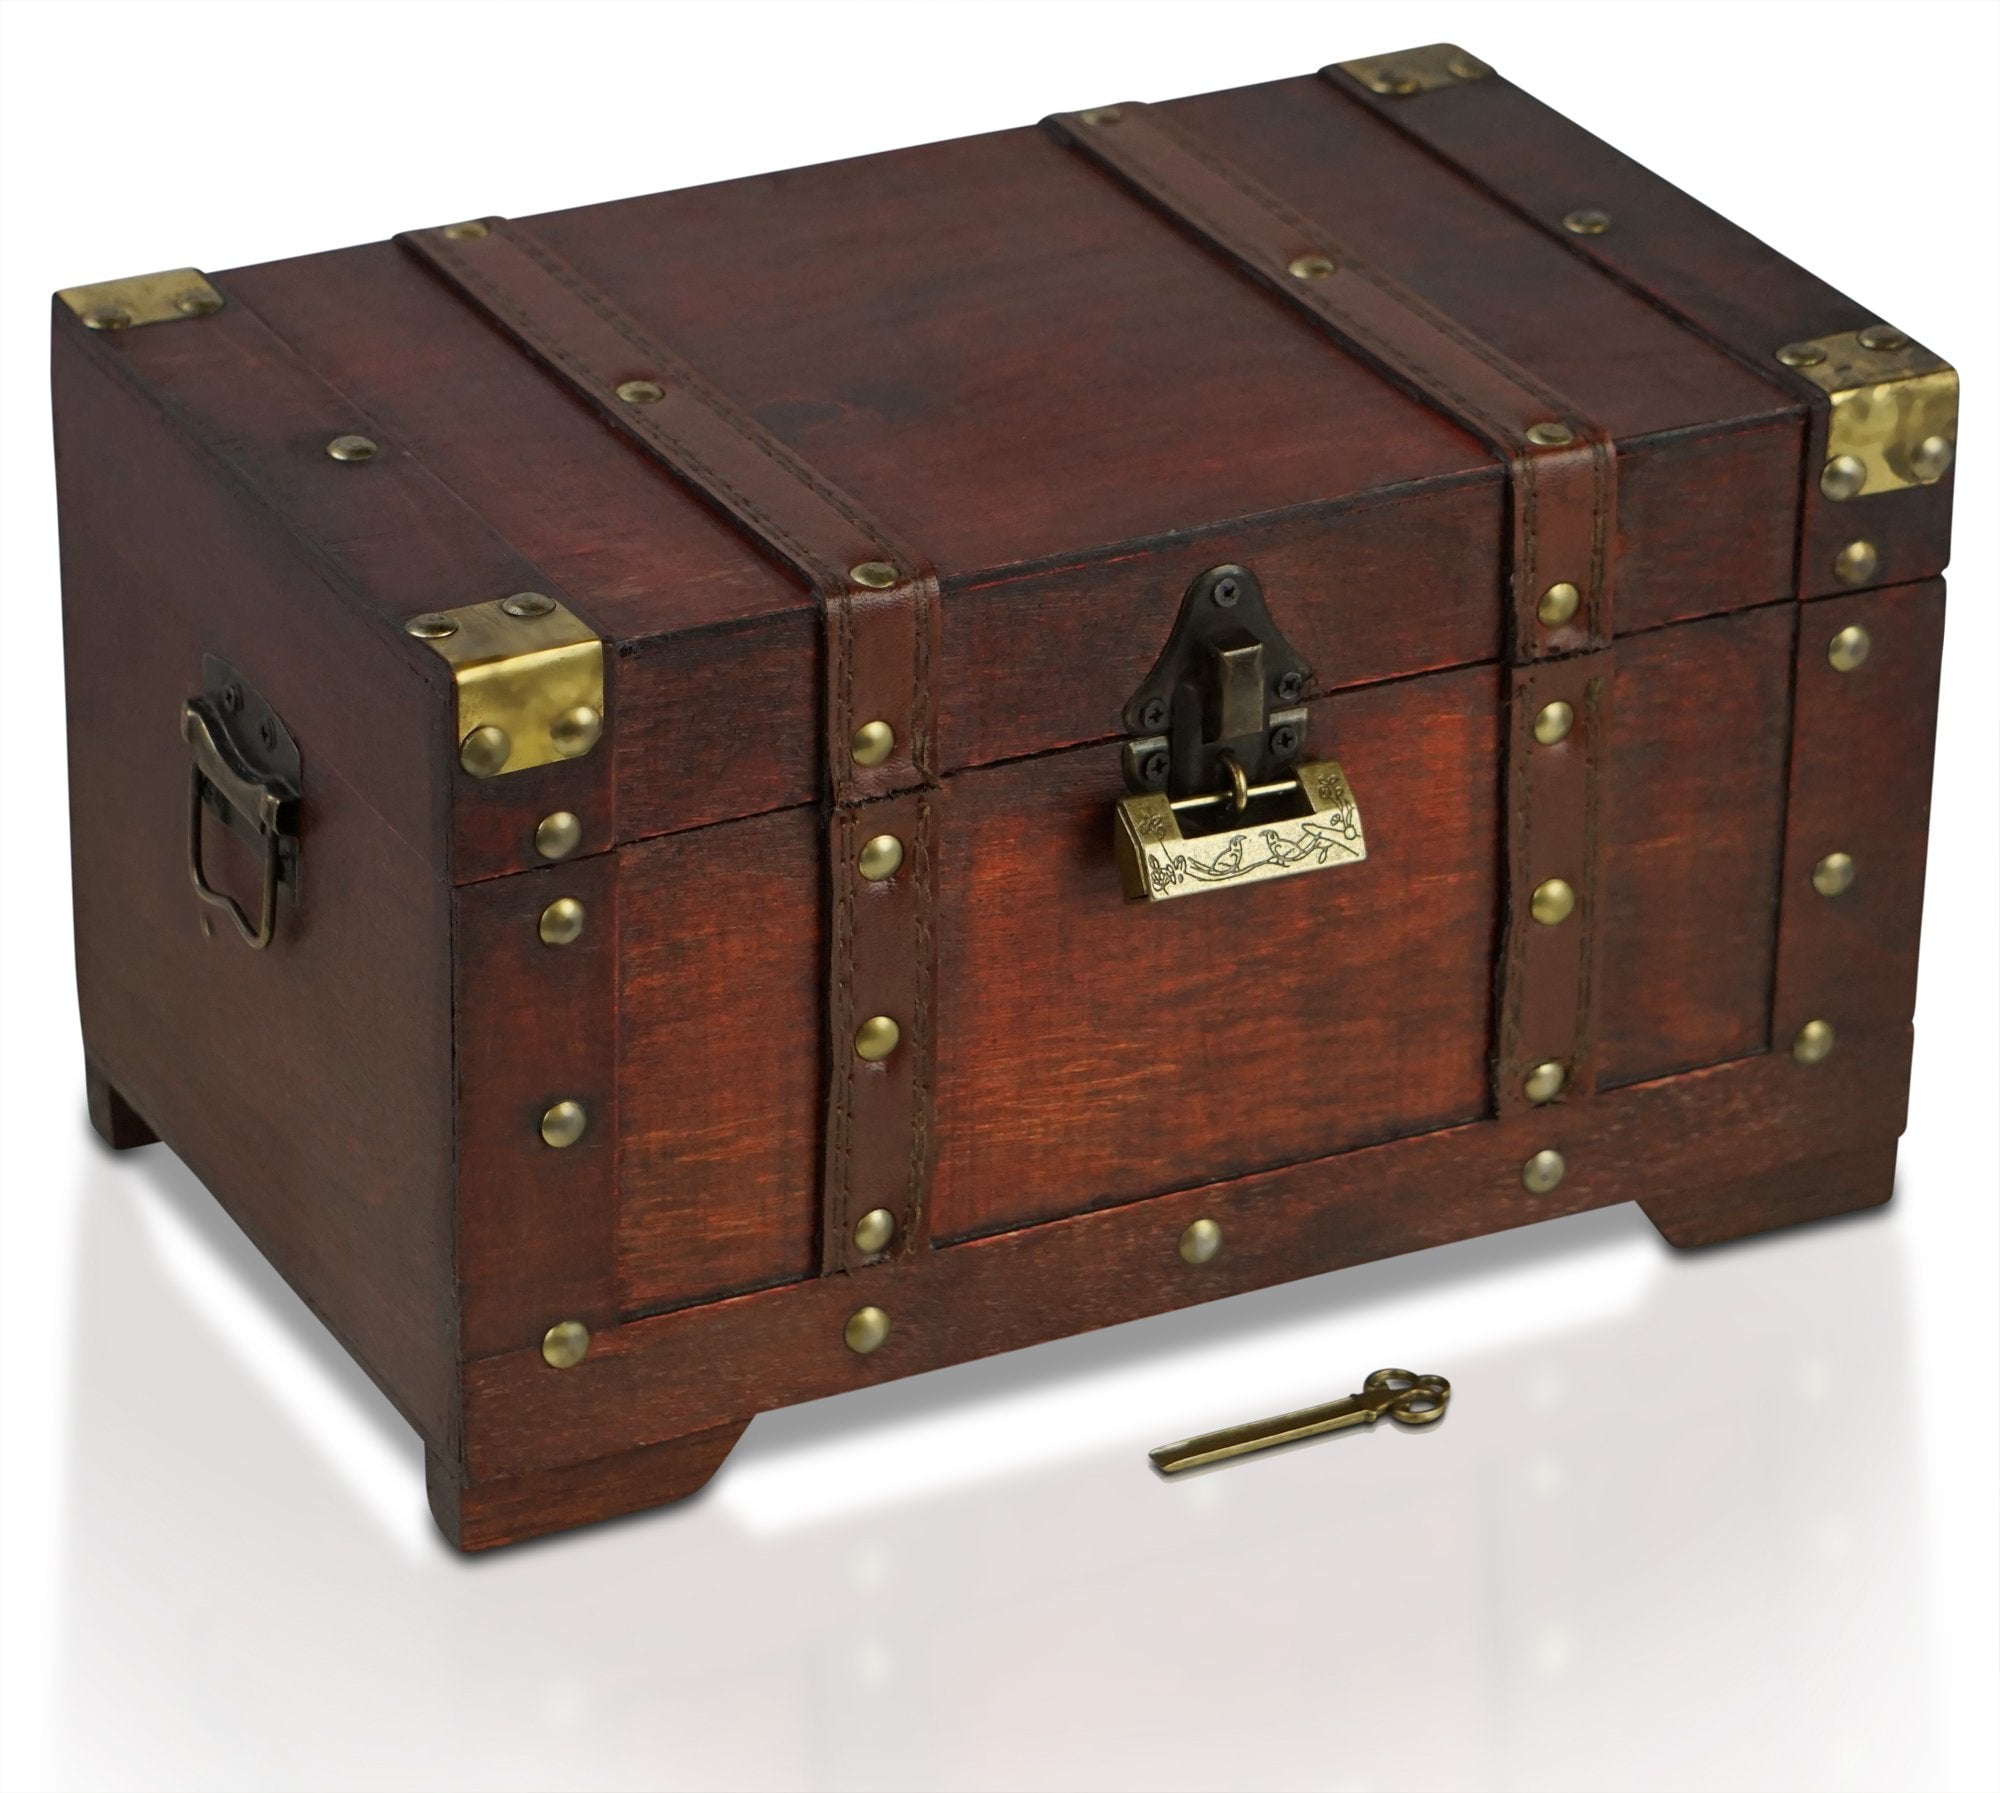 Metal Wrapped Large Treasure Chest With Compartments Wooden